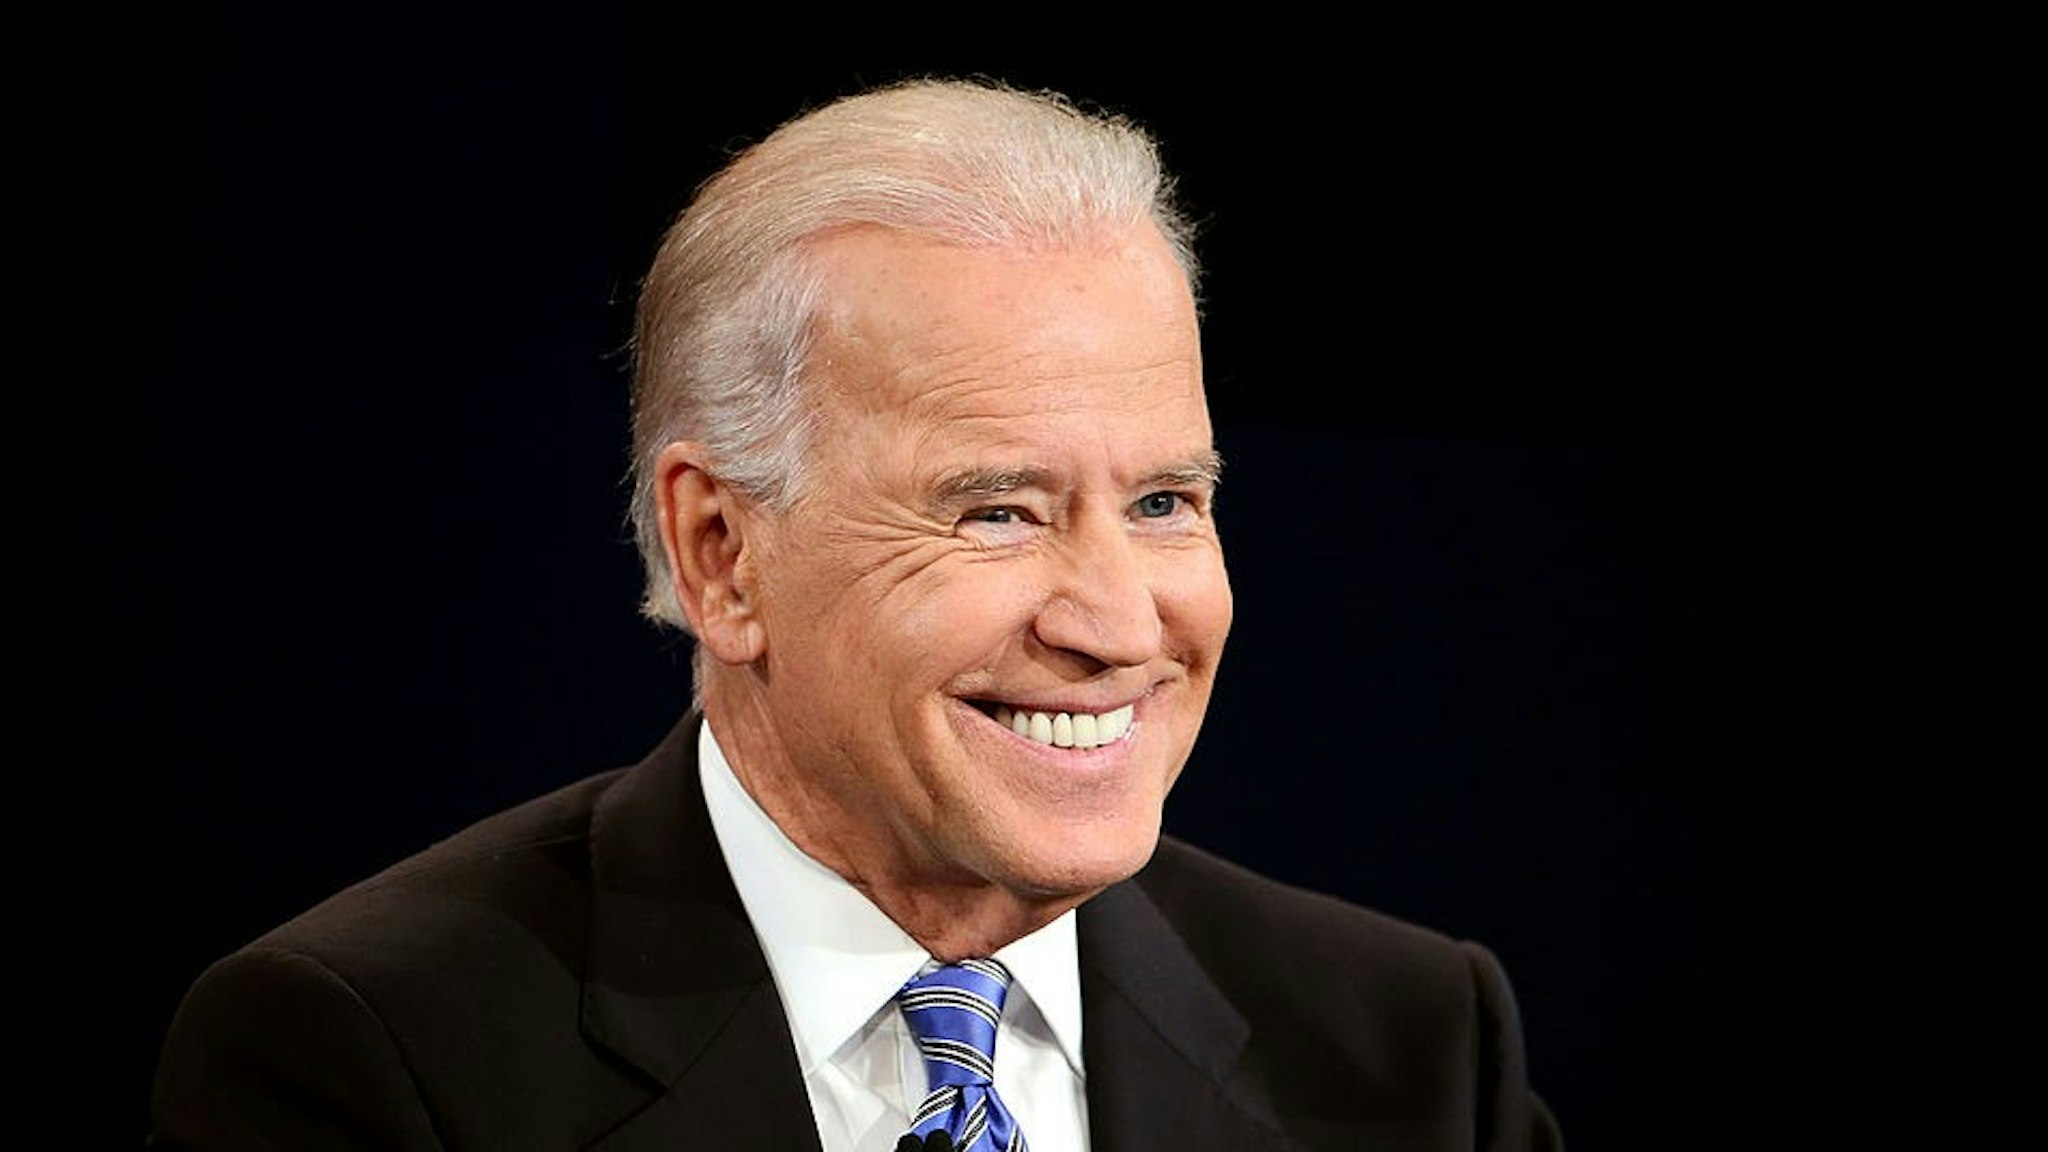 DANVILLE, KY - OCTOBER 11: U.S. Vice President Joe Biden smiles during the vice presidential debate at Centre College October 11, 2012 in Danville, Kentucky. This is the second of four debates during the presidential election season and the only debate between the vice presidential candidates before the closely-contested election November 6. (Photo by